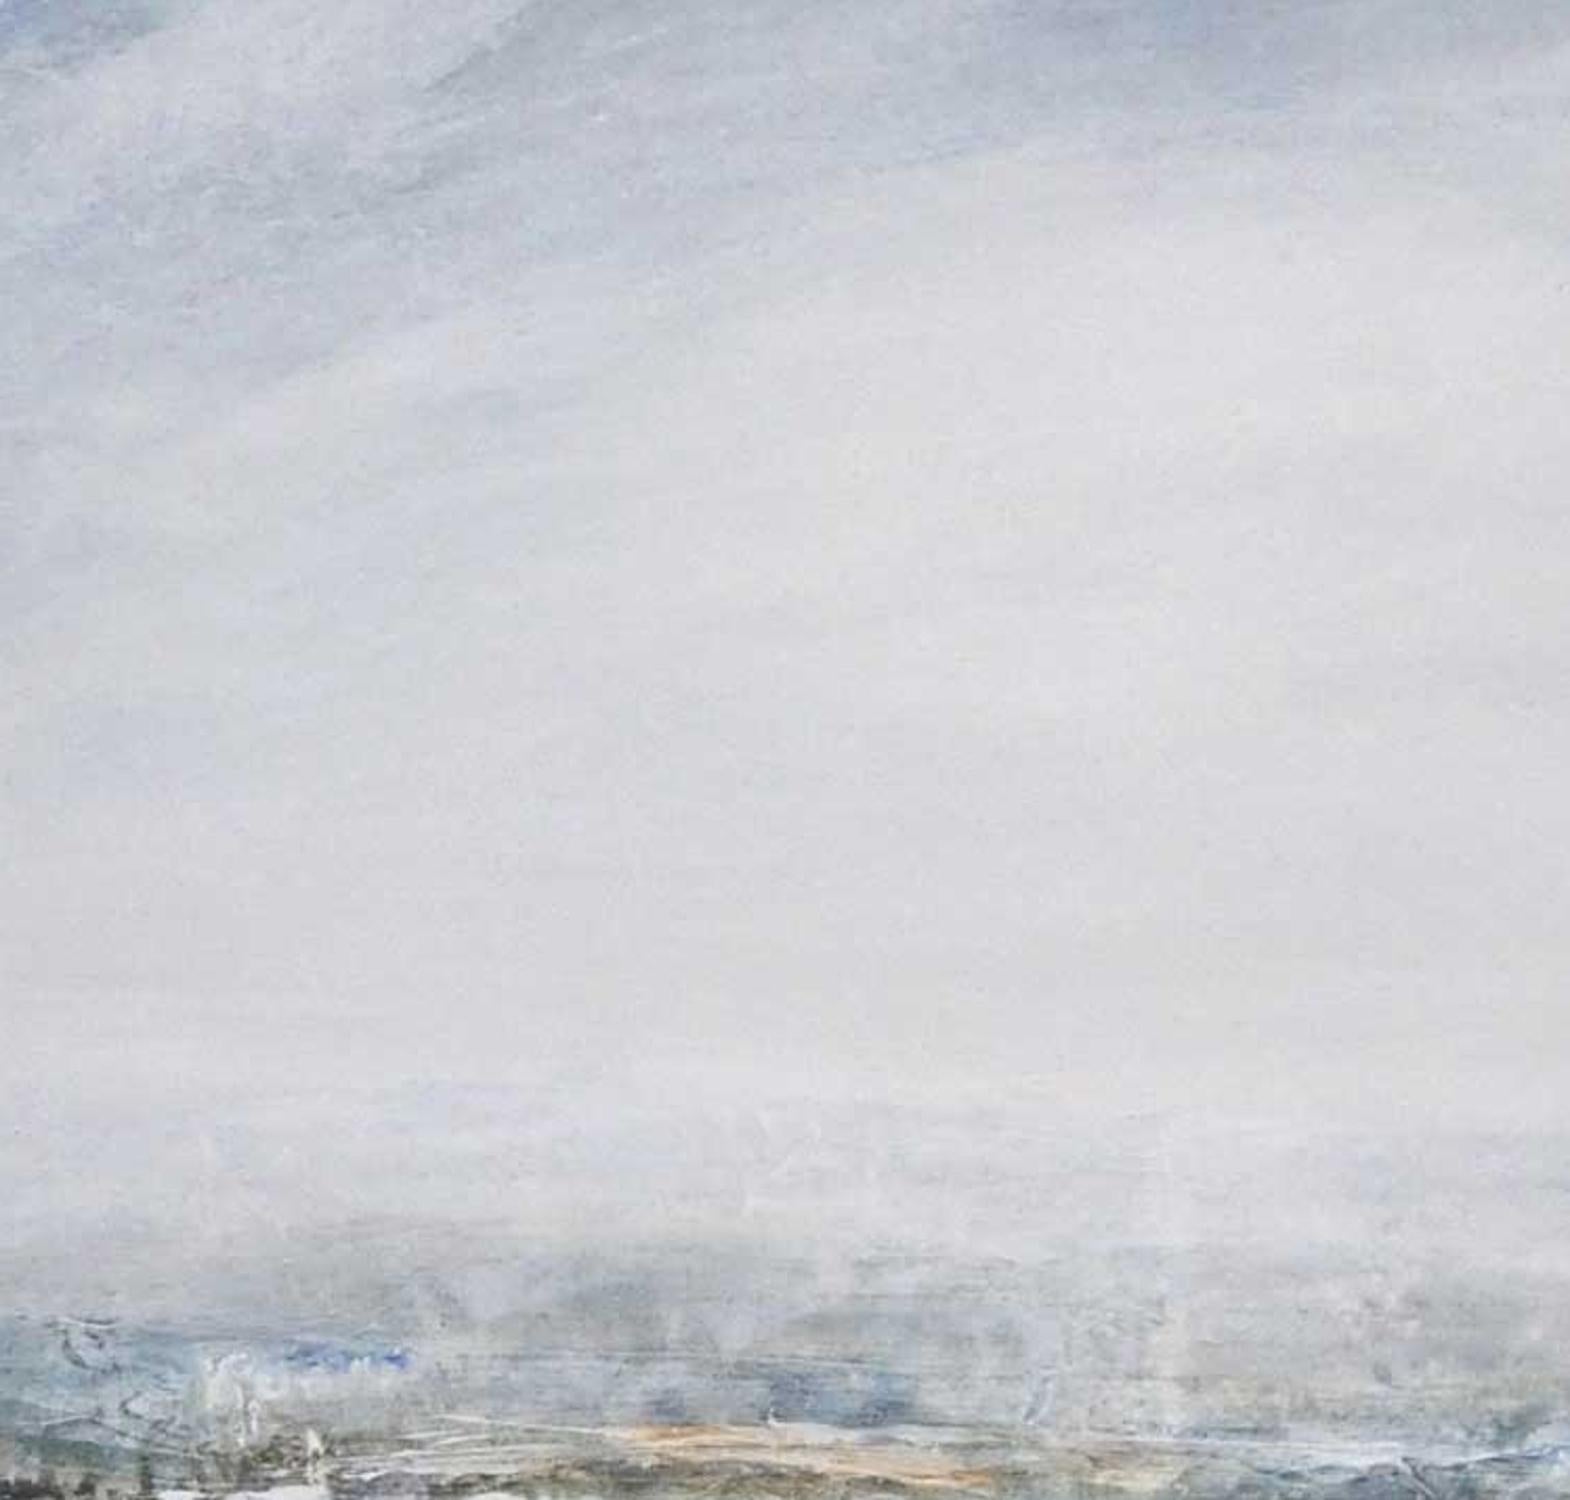 Sapphire & Diamond - Brooding British Seascape: Acrylic Paint on Board / Framed - Contemporary Painting by Leila Godden UA